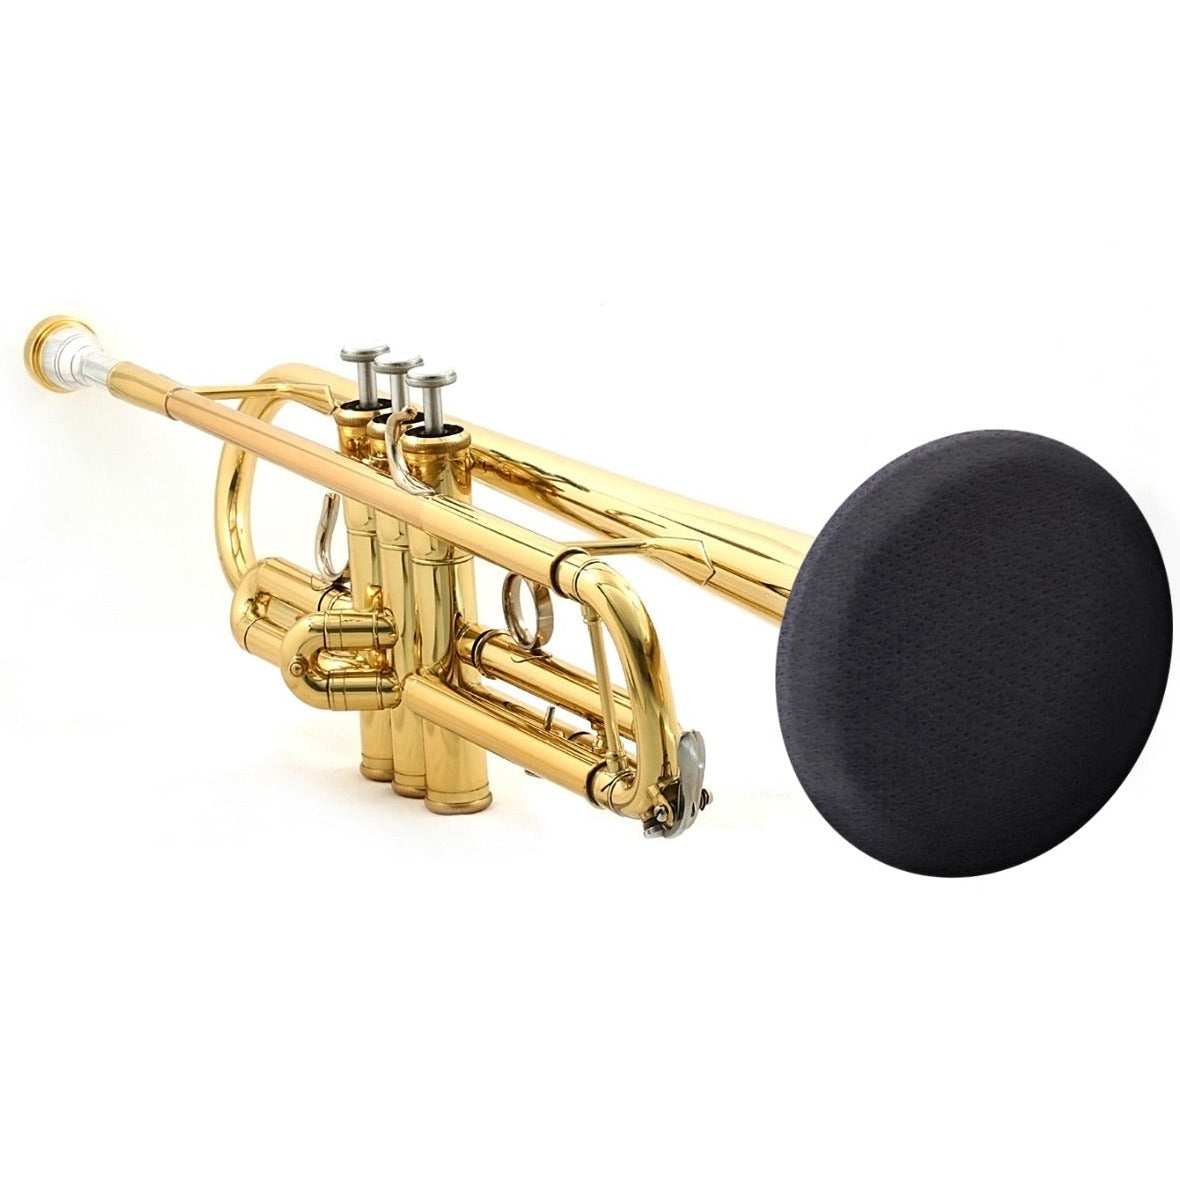 BLACK DUAL-LAYER 4-5" INSTRUMENT BELL COVER